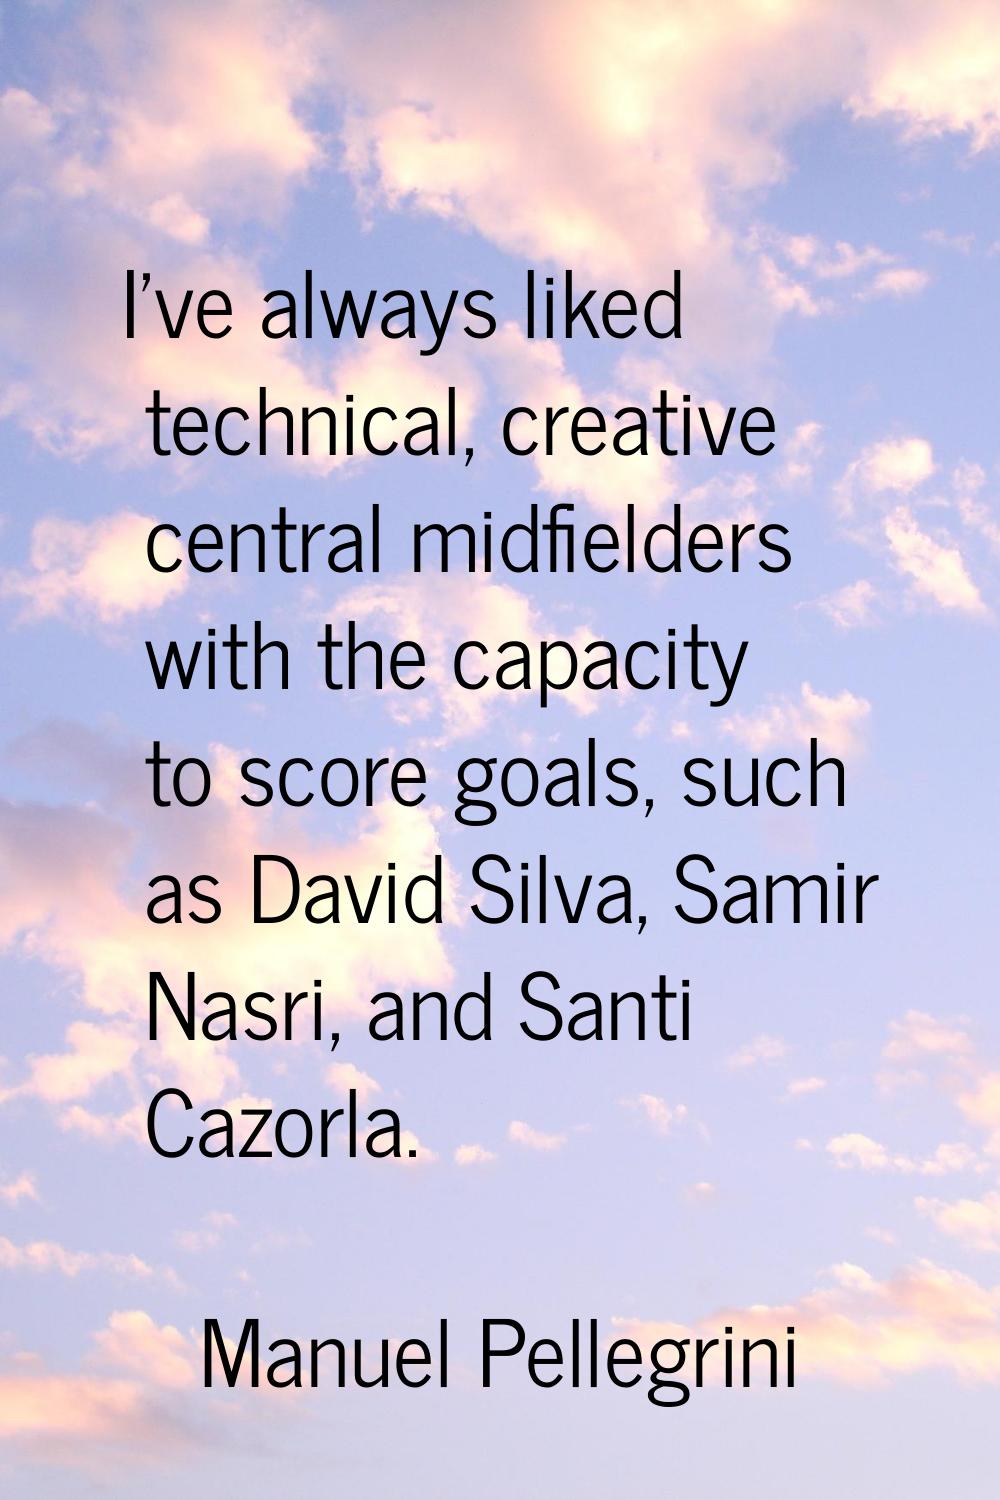 I've always liked technical, creative central midfielders with the capacity to score goals, such as